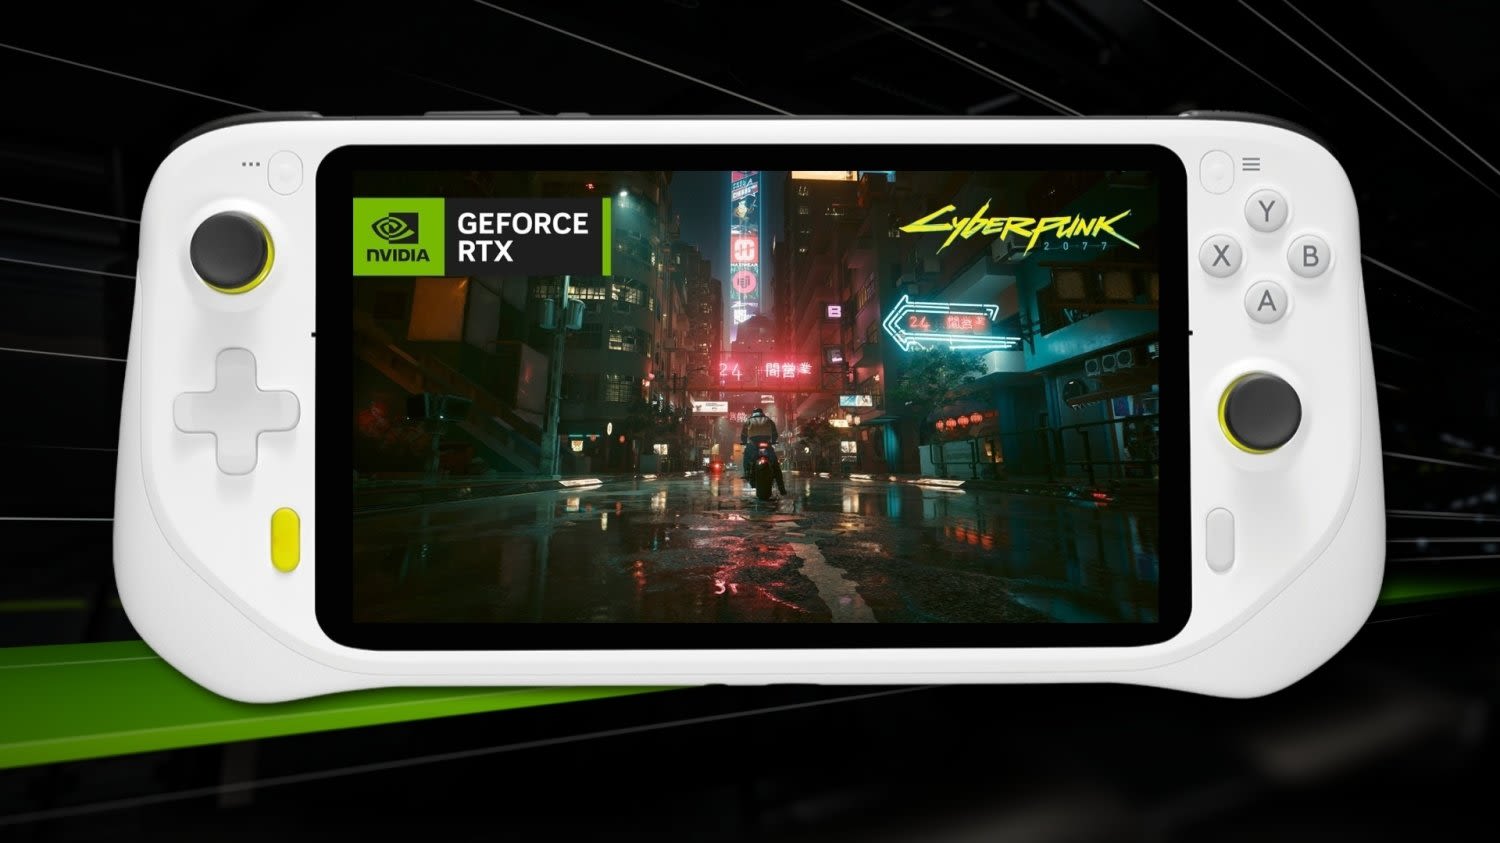 NVIDIA and MediaTek are rumored to be developing an Arm-based SoC for PC gaming handhelds